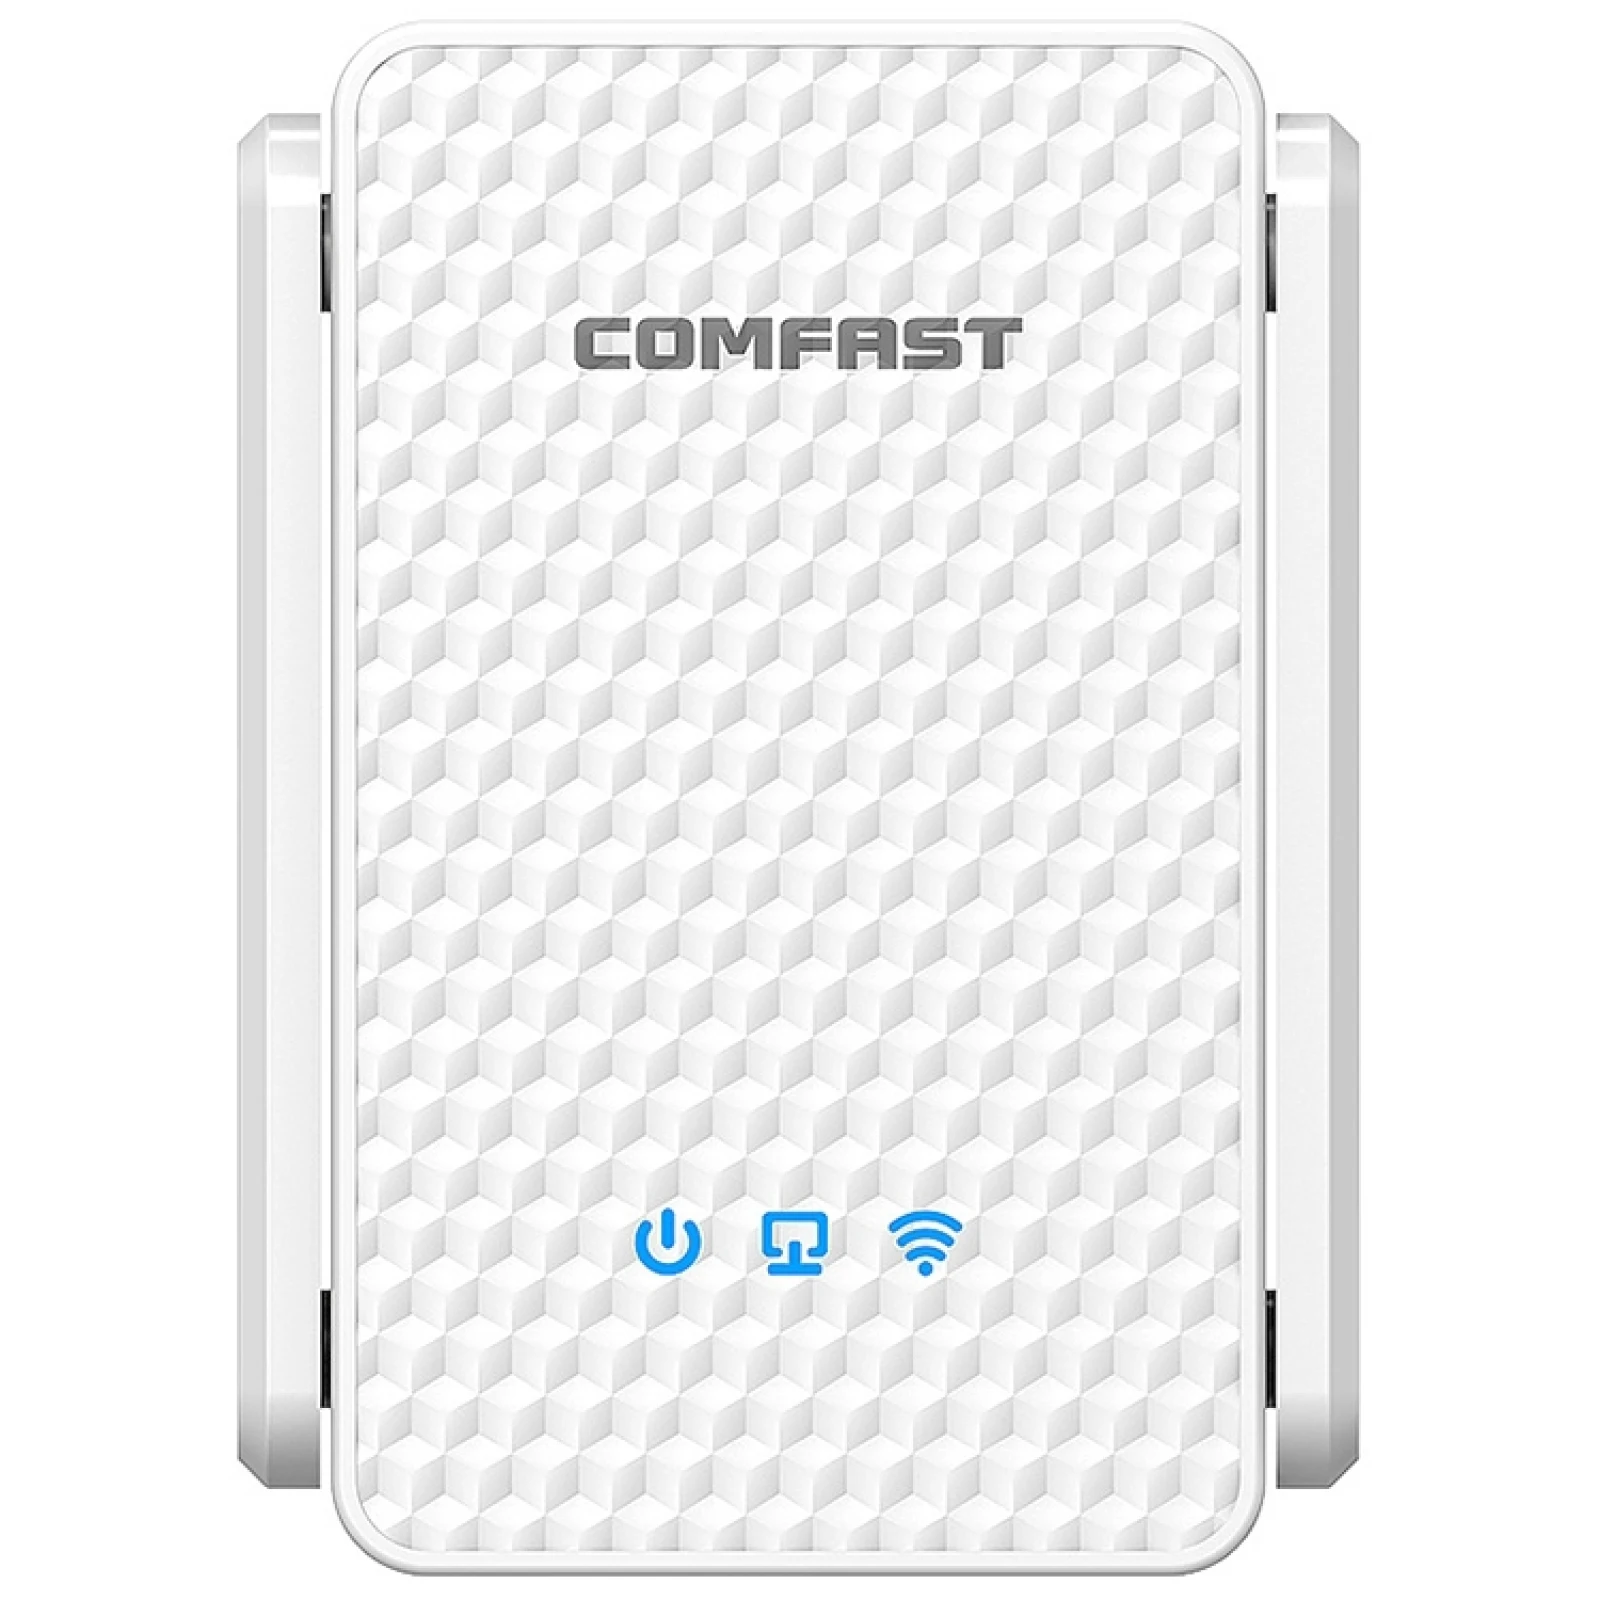 COMFAST CF-XR186 3000Mbps Supper High Speed WiFi 6 Wireless Router 2.4GHz: 574Mbps 5.8GHz: 2400Mbps IEEE802.11a/b/g/n/ac/ax